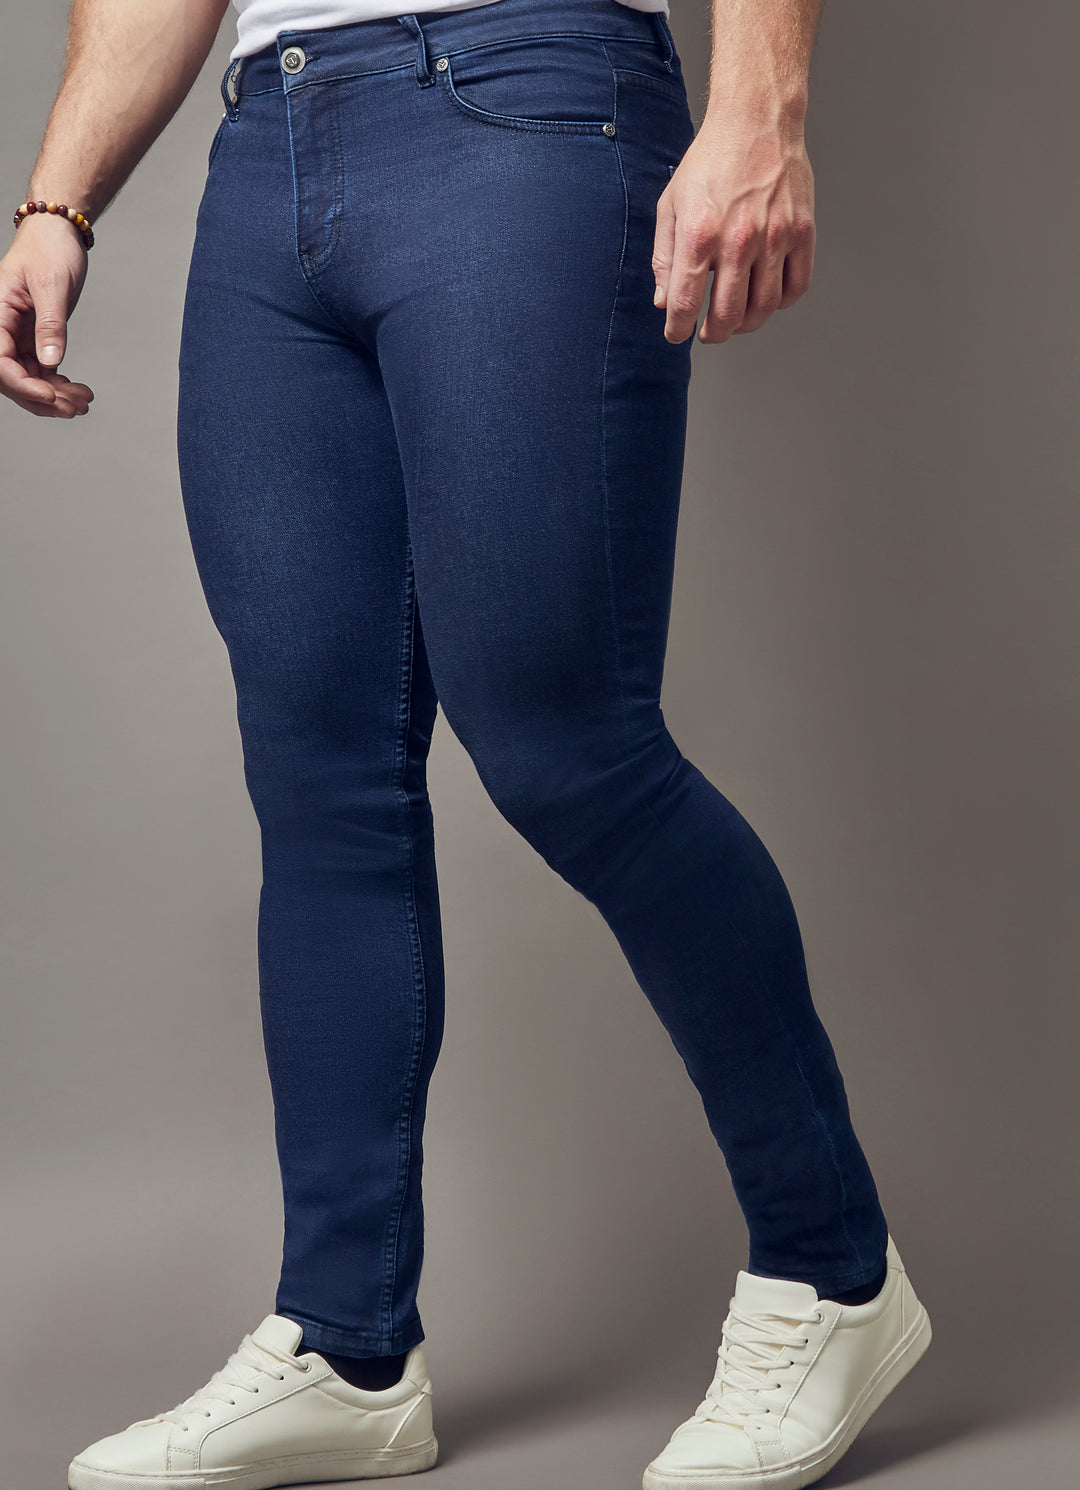 navy tapered fit jeans by Tapered Menswear, showcasing the muscle fit design for a comfortable and well-sculpted silhouette